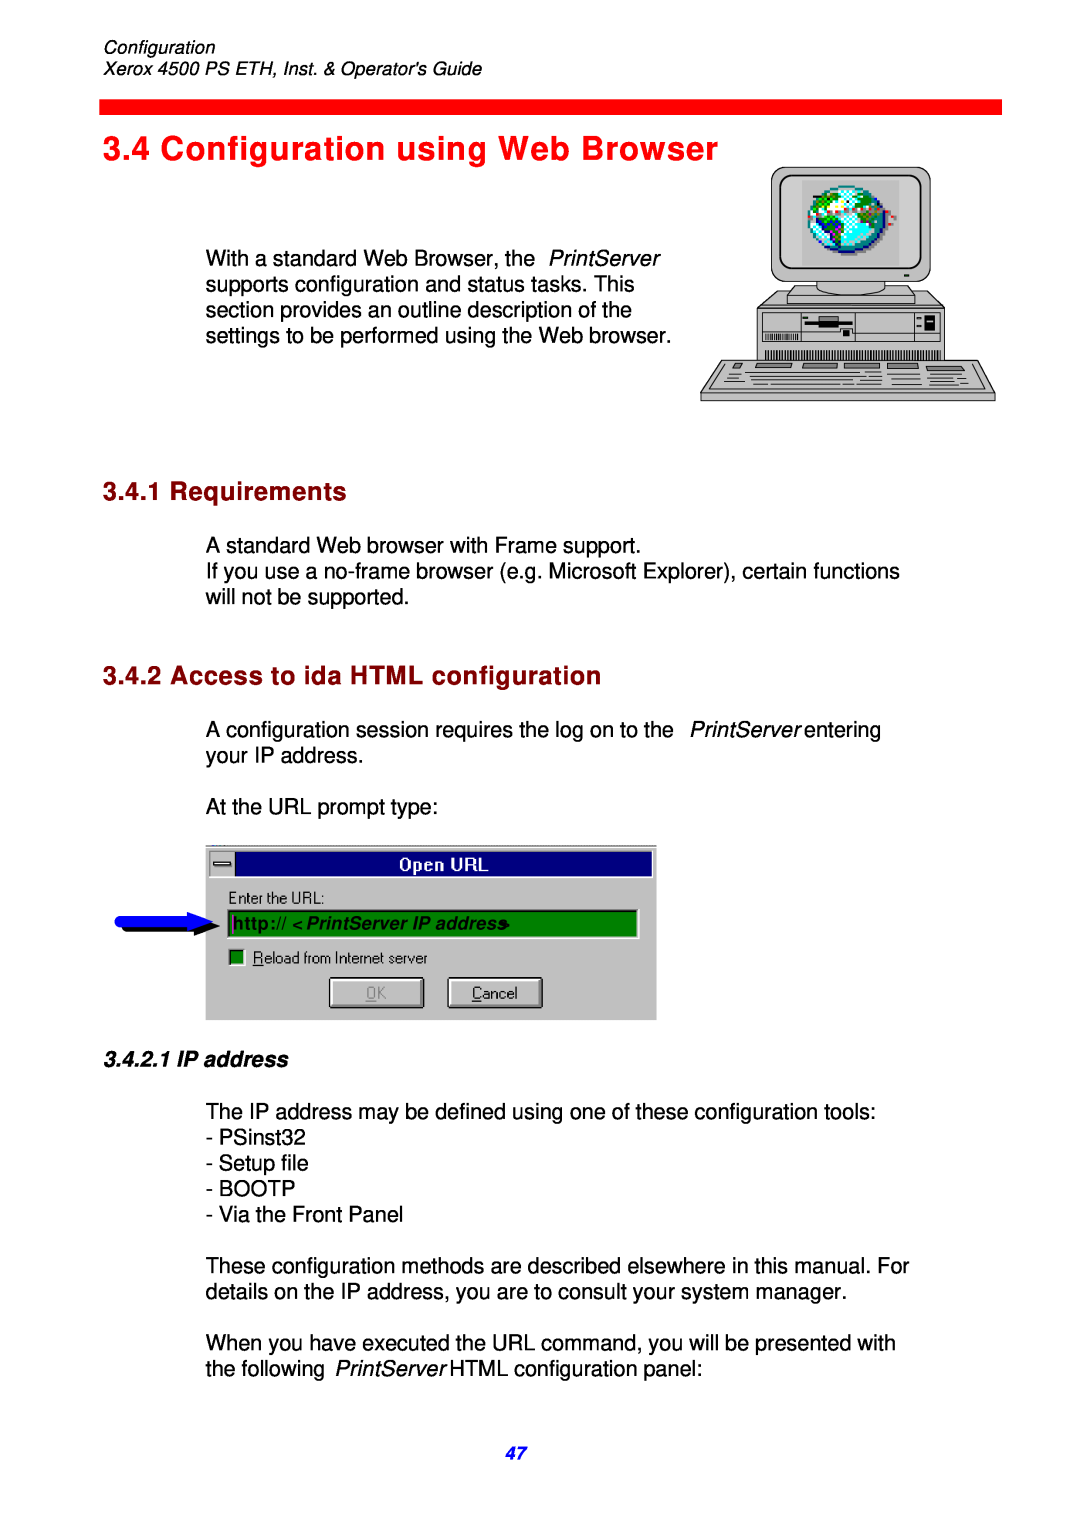 Xerox 4500 ps eth Configuration using Web Browser, Requirements, Access to ida HTML configuration, IP address 